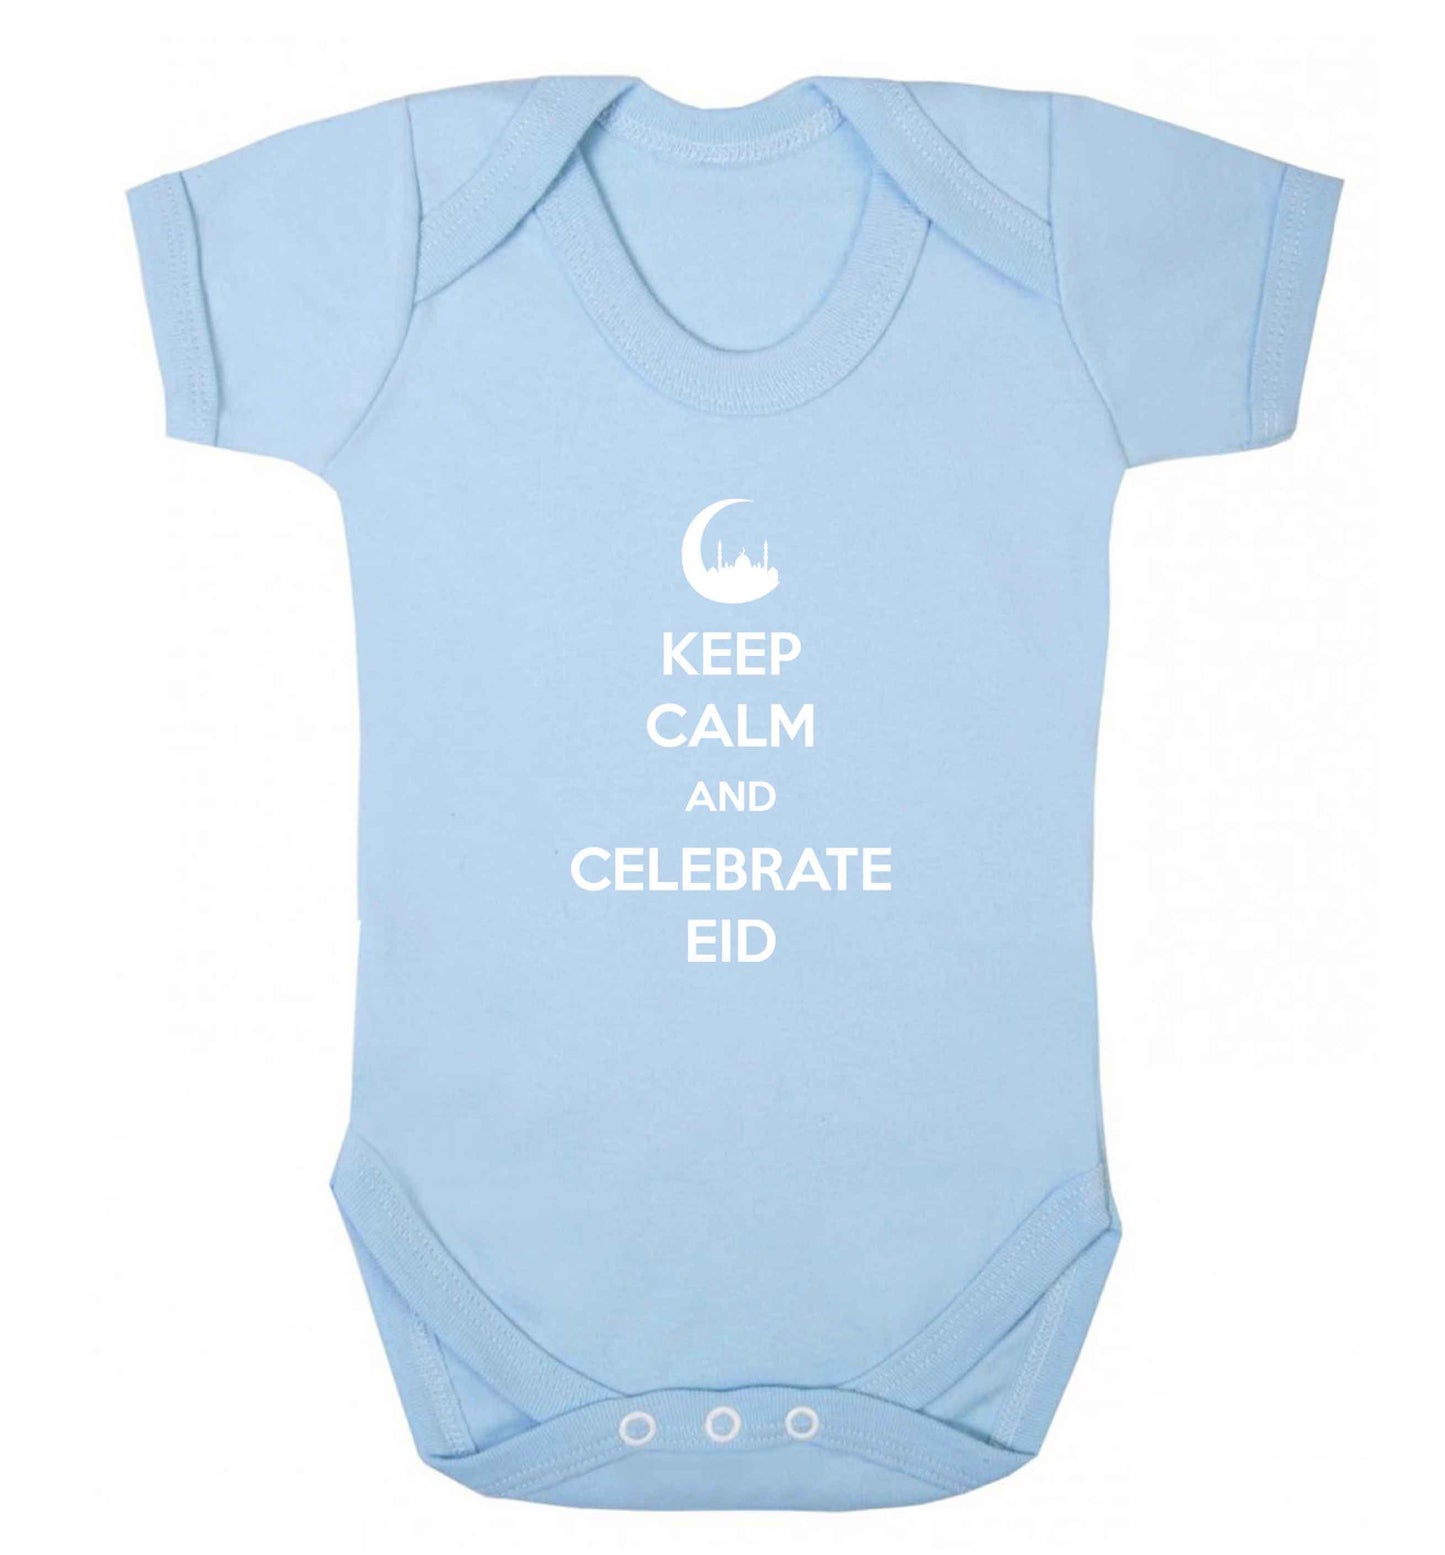 Keep calm and celebrate Eid baby vest pale blue 18-24 months